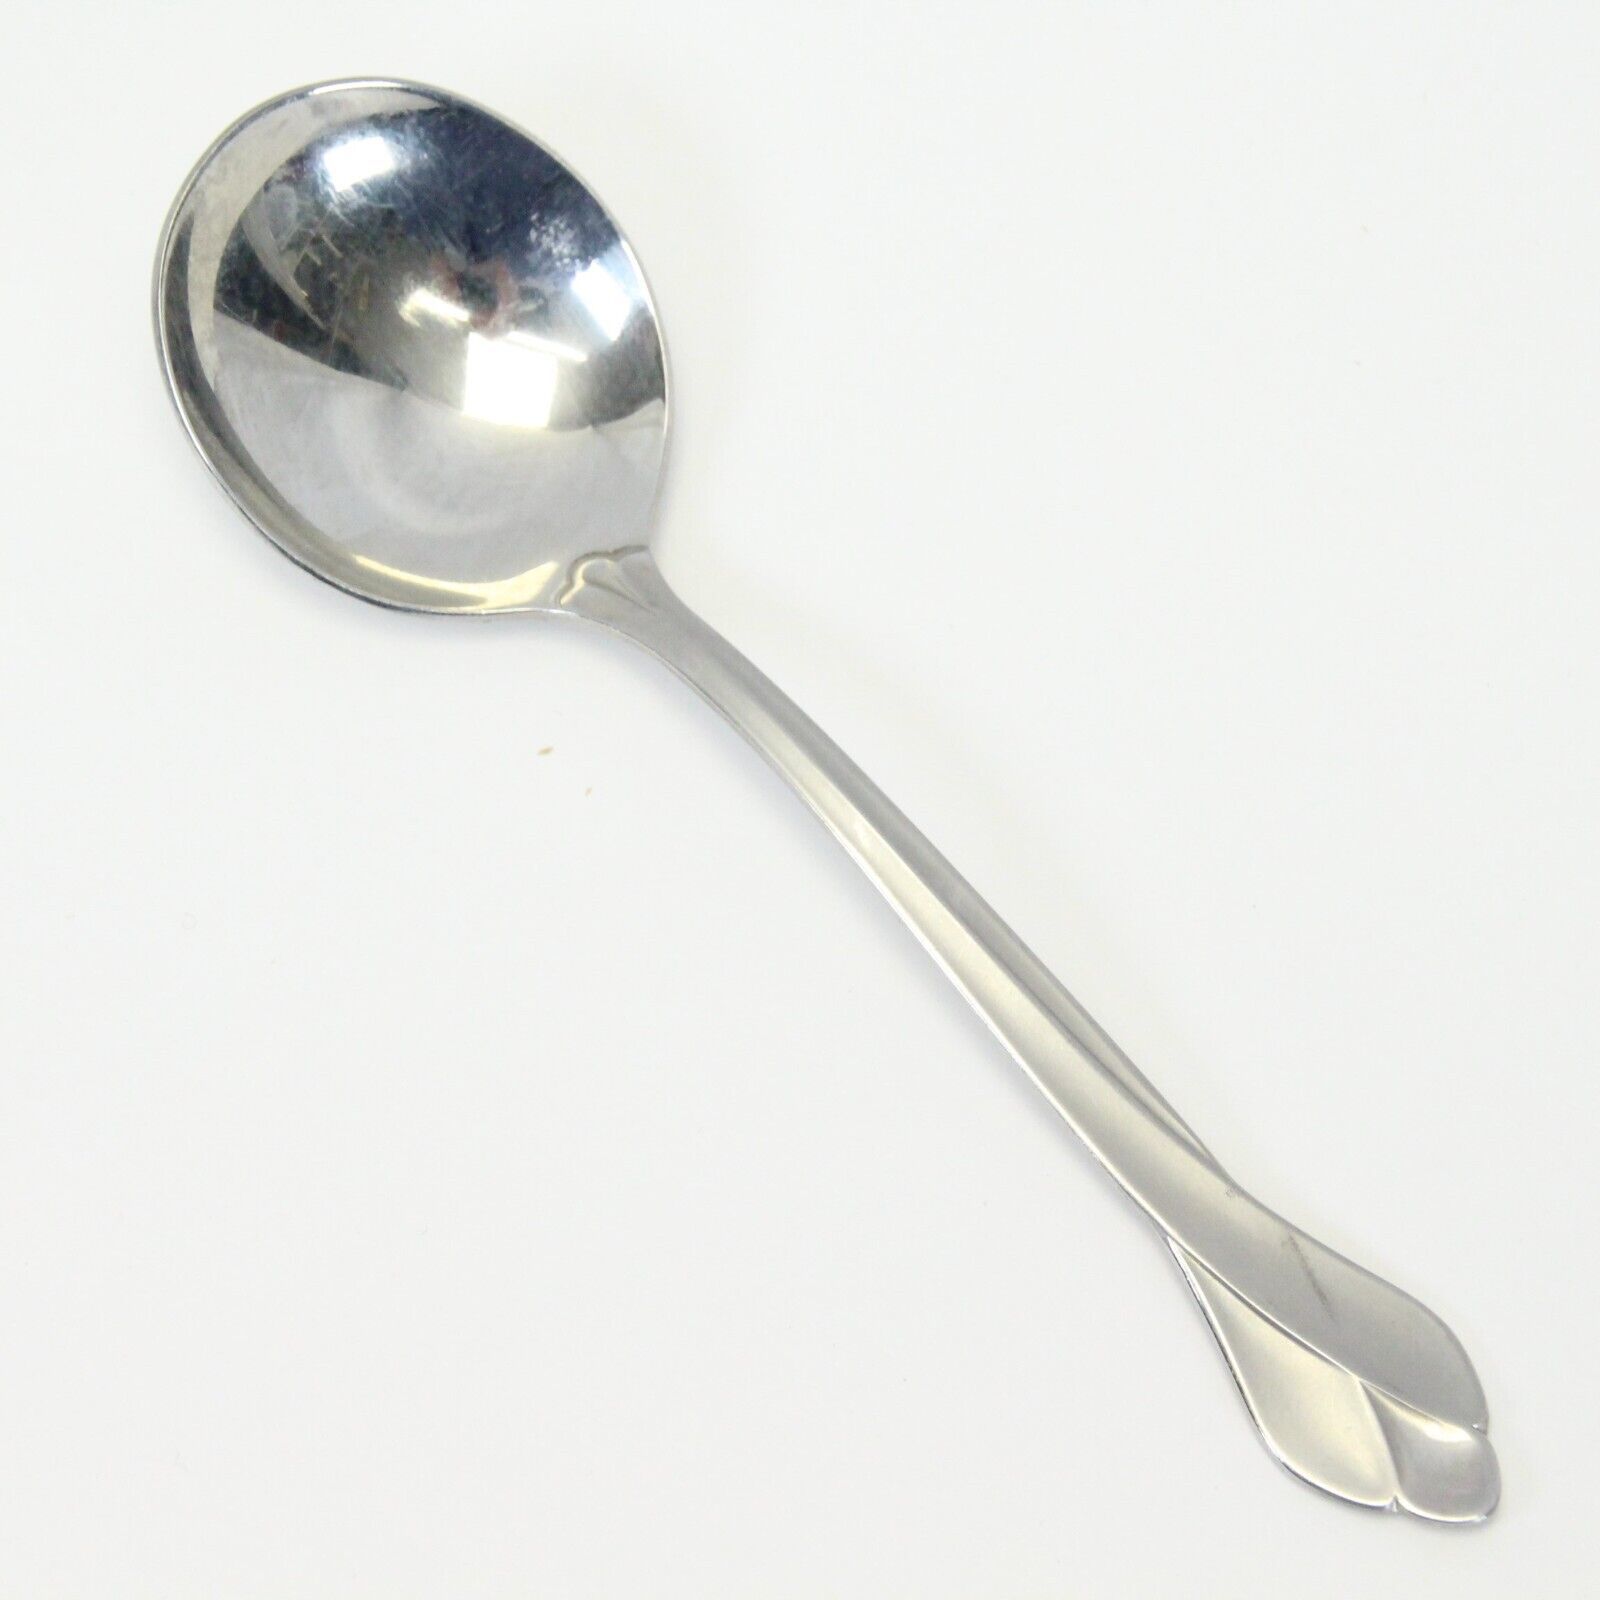 Primary image for Oneida Tribeca Sugar Spoon 6 7/8" Stainless